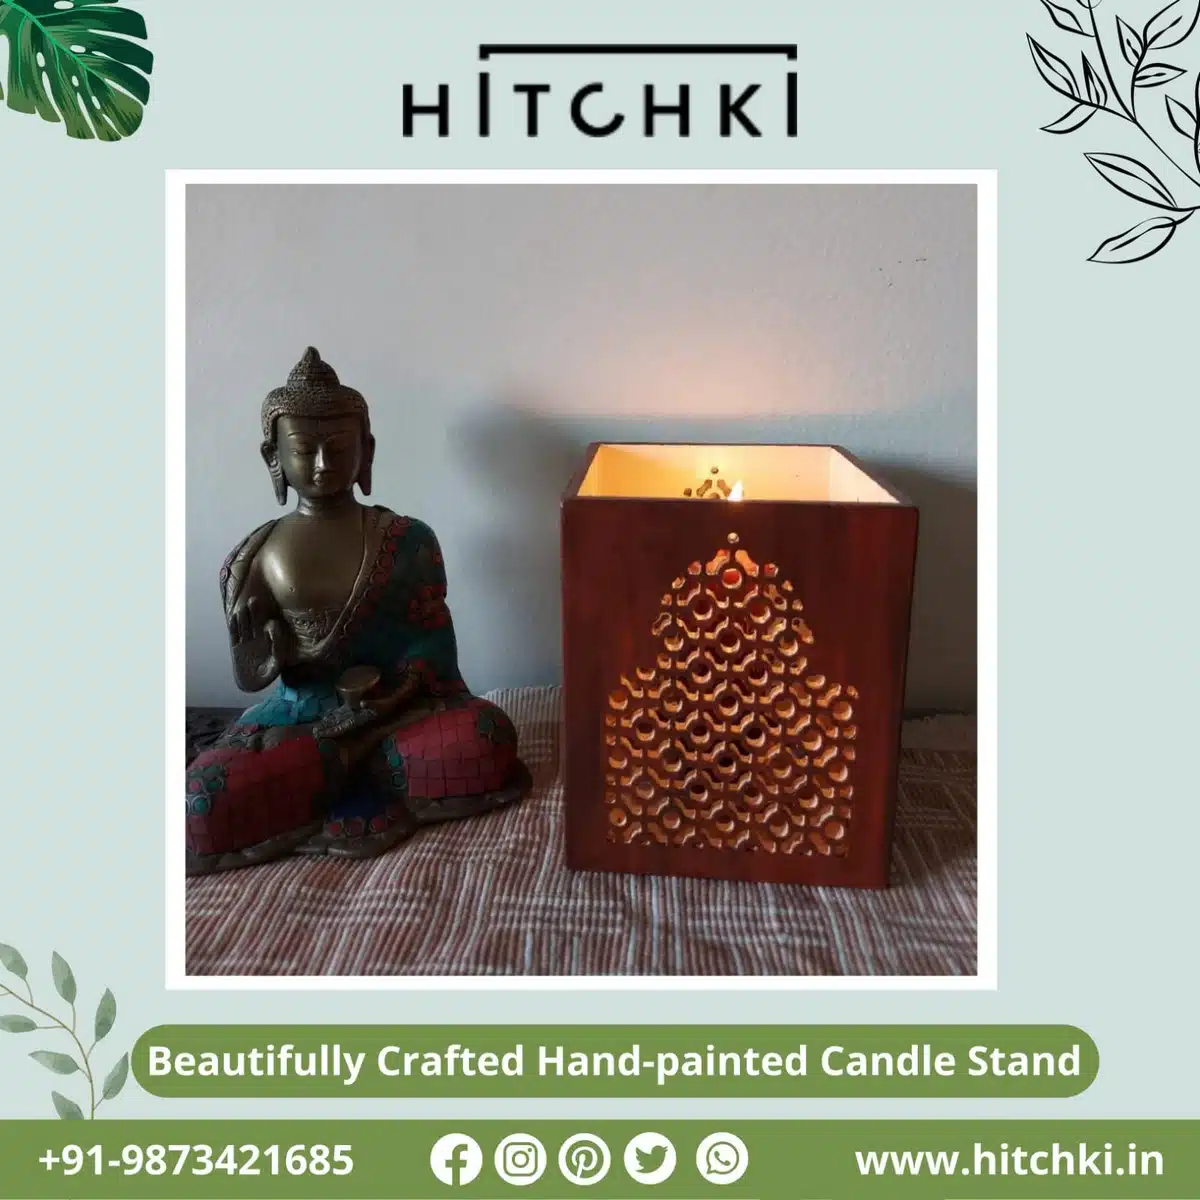 Crafted Hand Painted Candle Stand From Hitchki